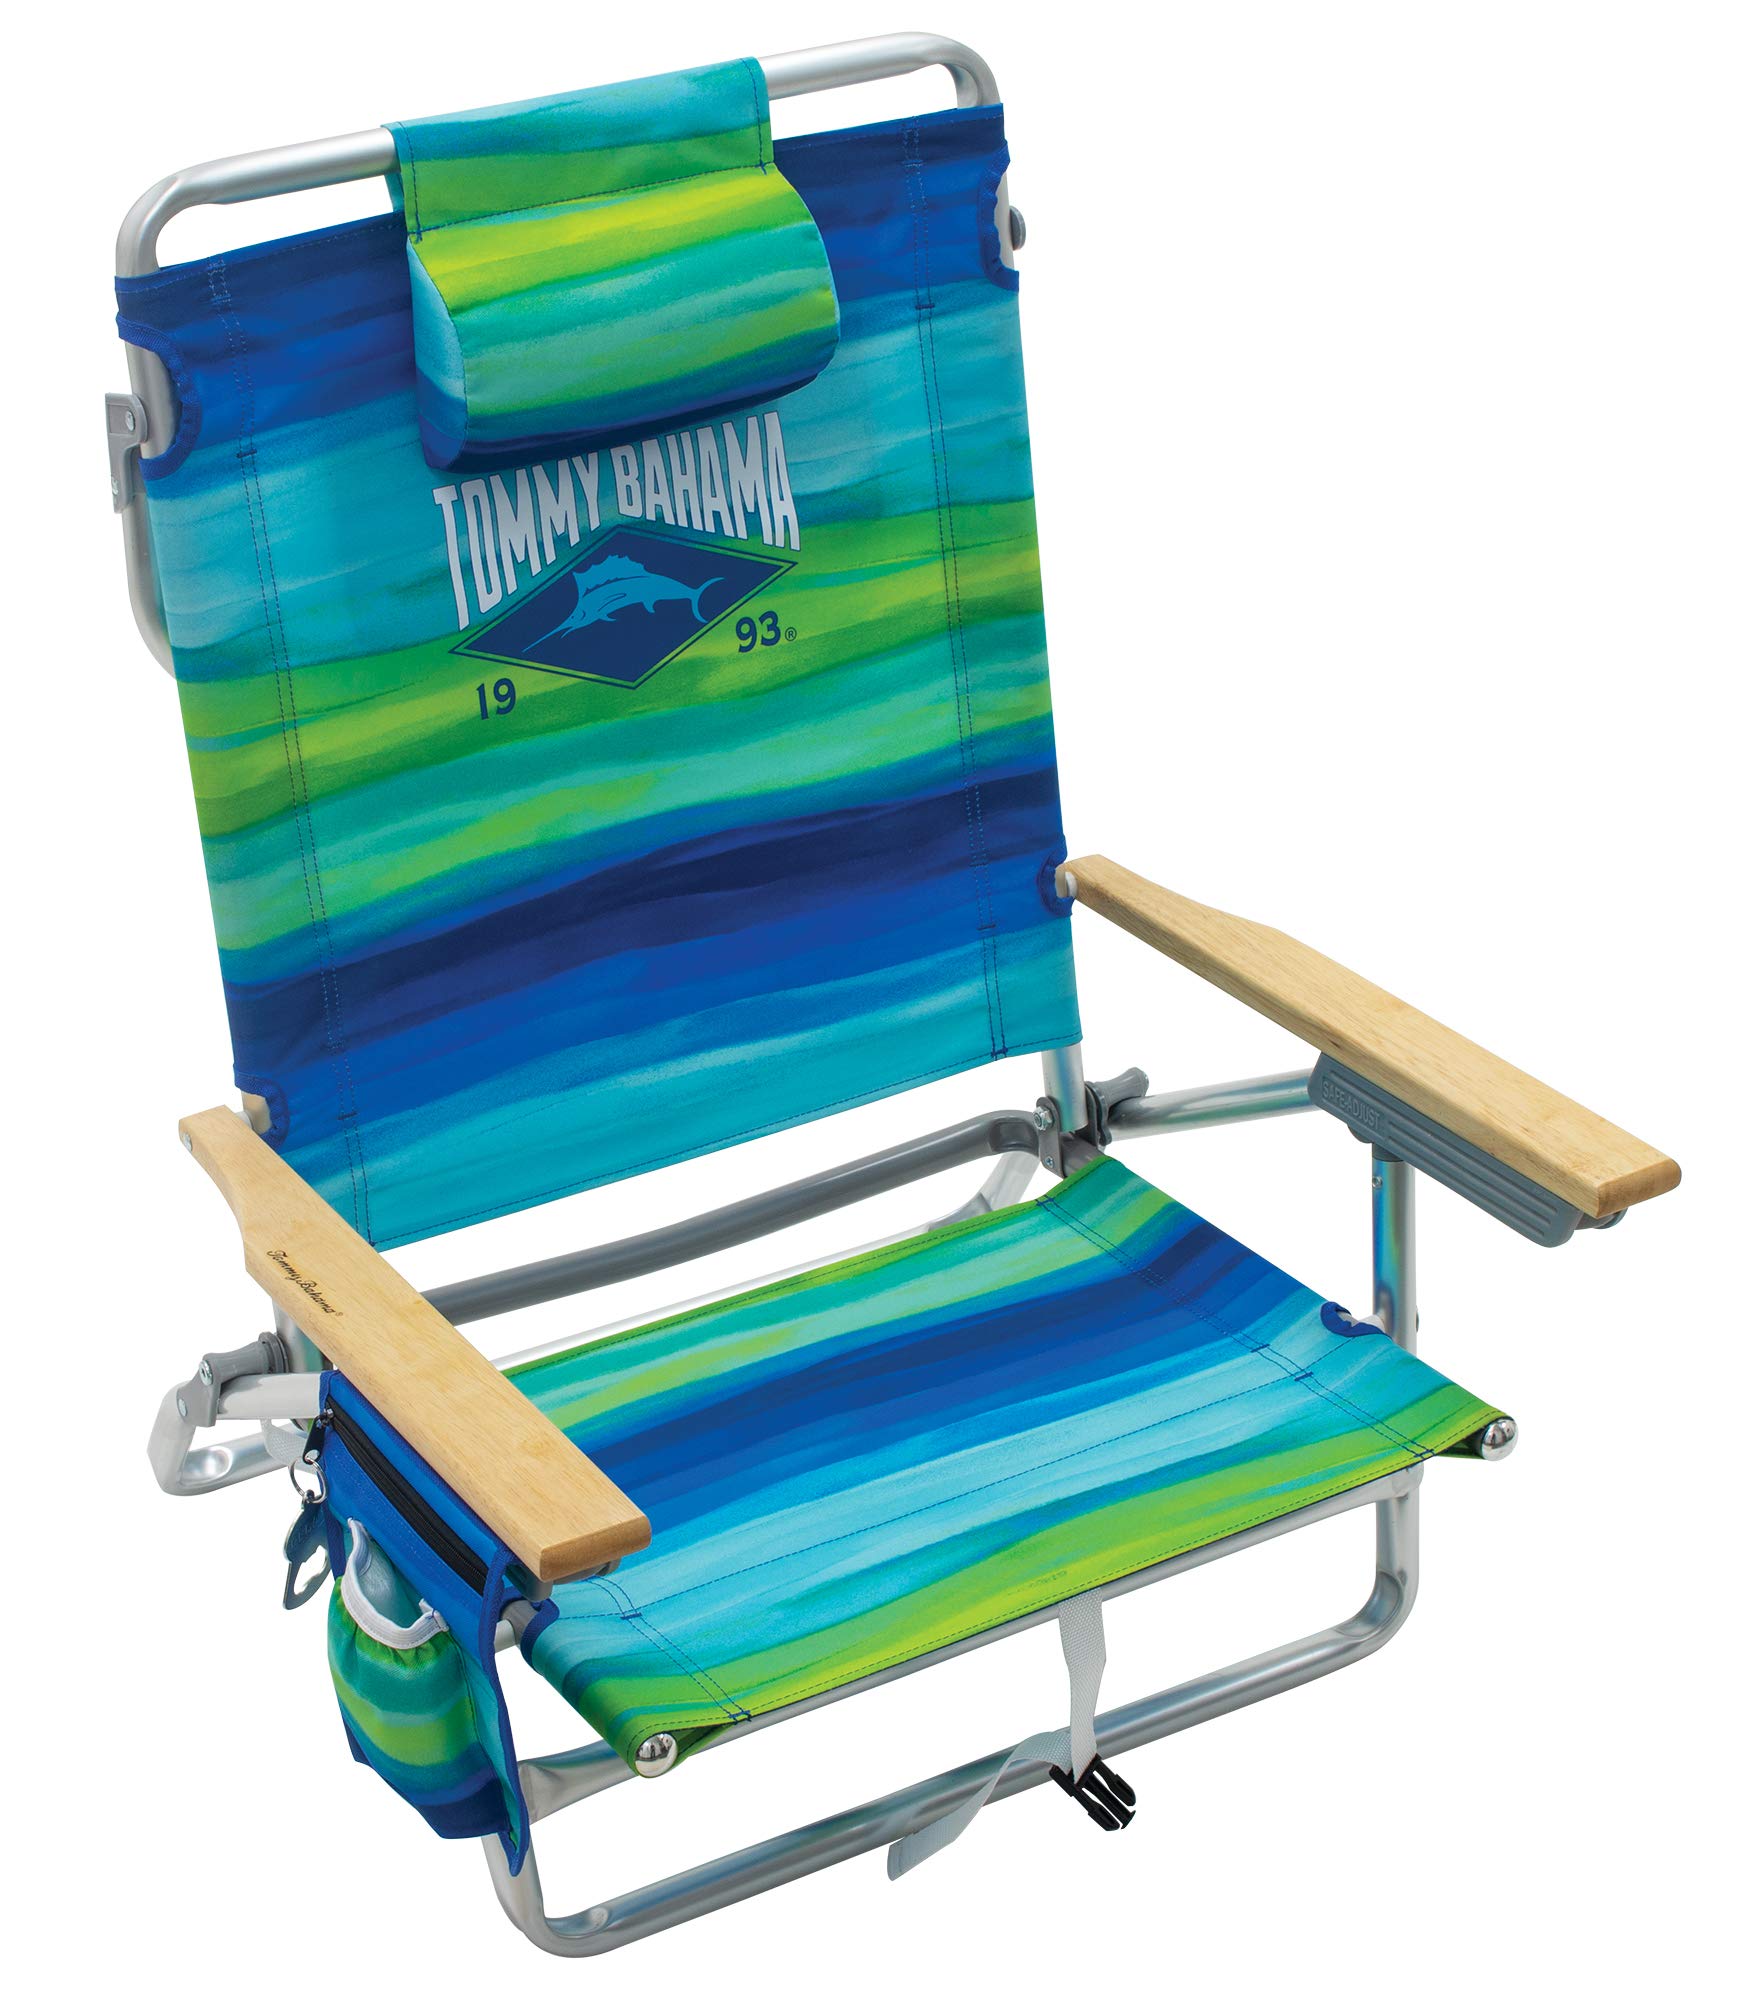 Tommy Bahama 5-Position Classic Lay Flat Folding Backpack Beach Chair, Blue and Green Stripe , 23" x 25.25" x 31.5"